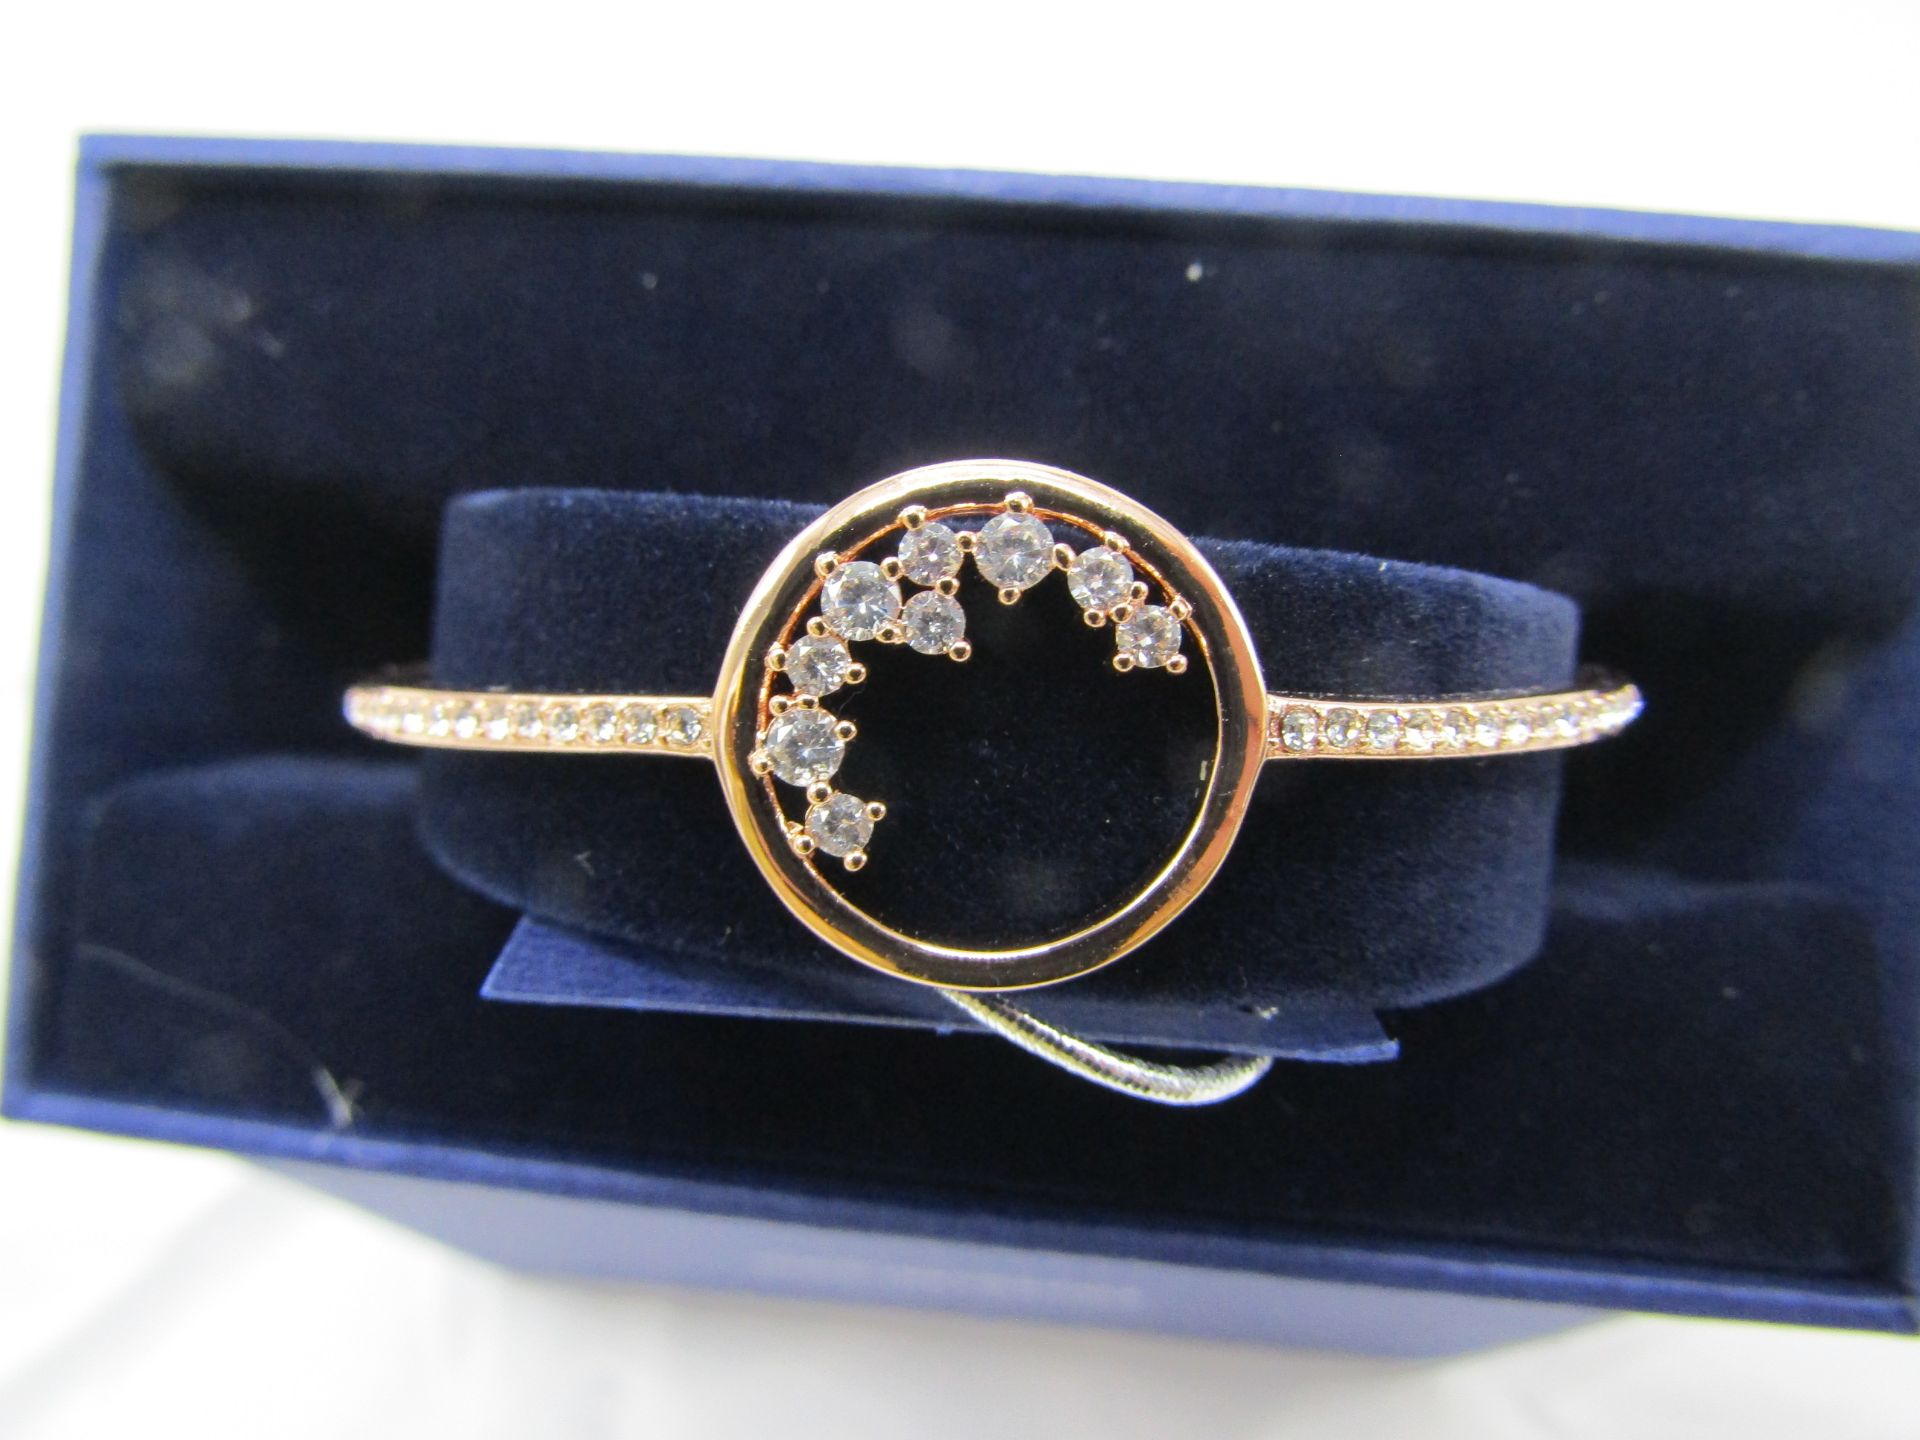 Swarovski 5493393 Crystal and rose gold Plated bangle, new in presentation box and gift bag. - Image 2 of 2